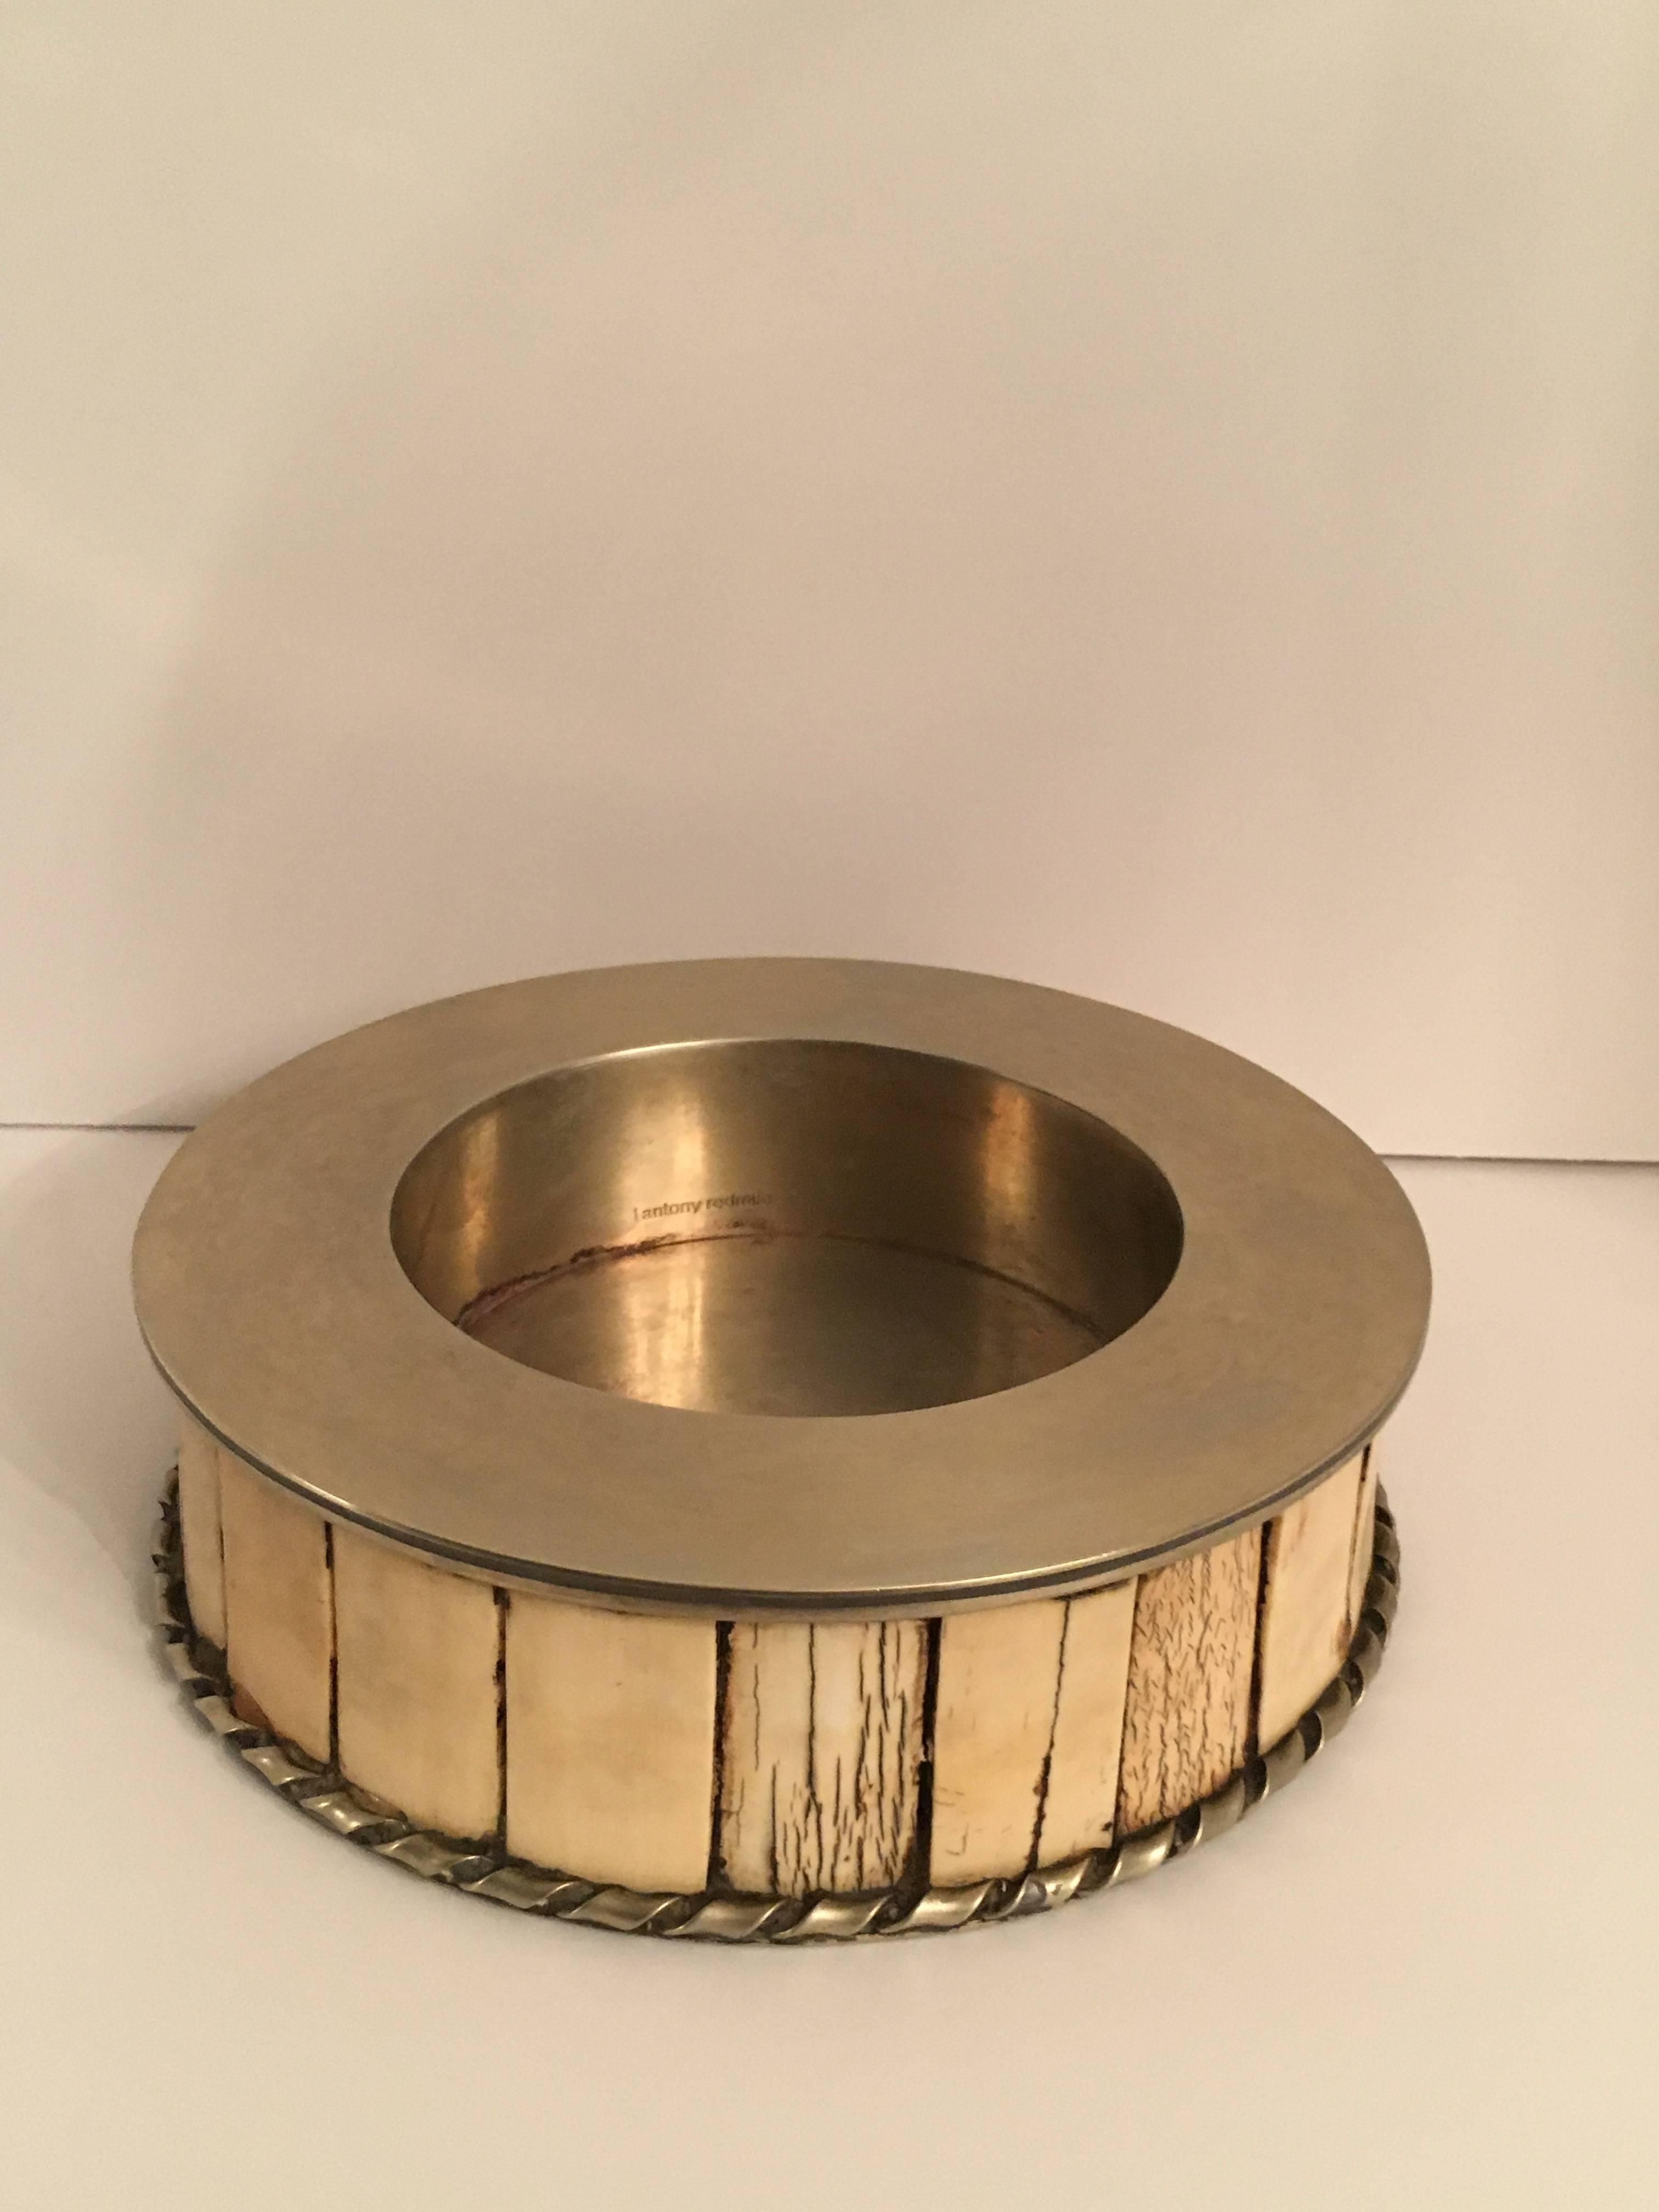 J Antony Redmile brass and bone coaster. In excellent condition, this piece works perfectly in many bar settings that display a more rustic, primitive collection, but the same great tasting Champagnes and Apertifs.